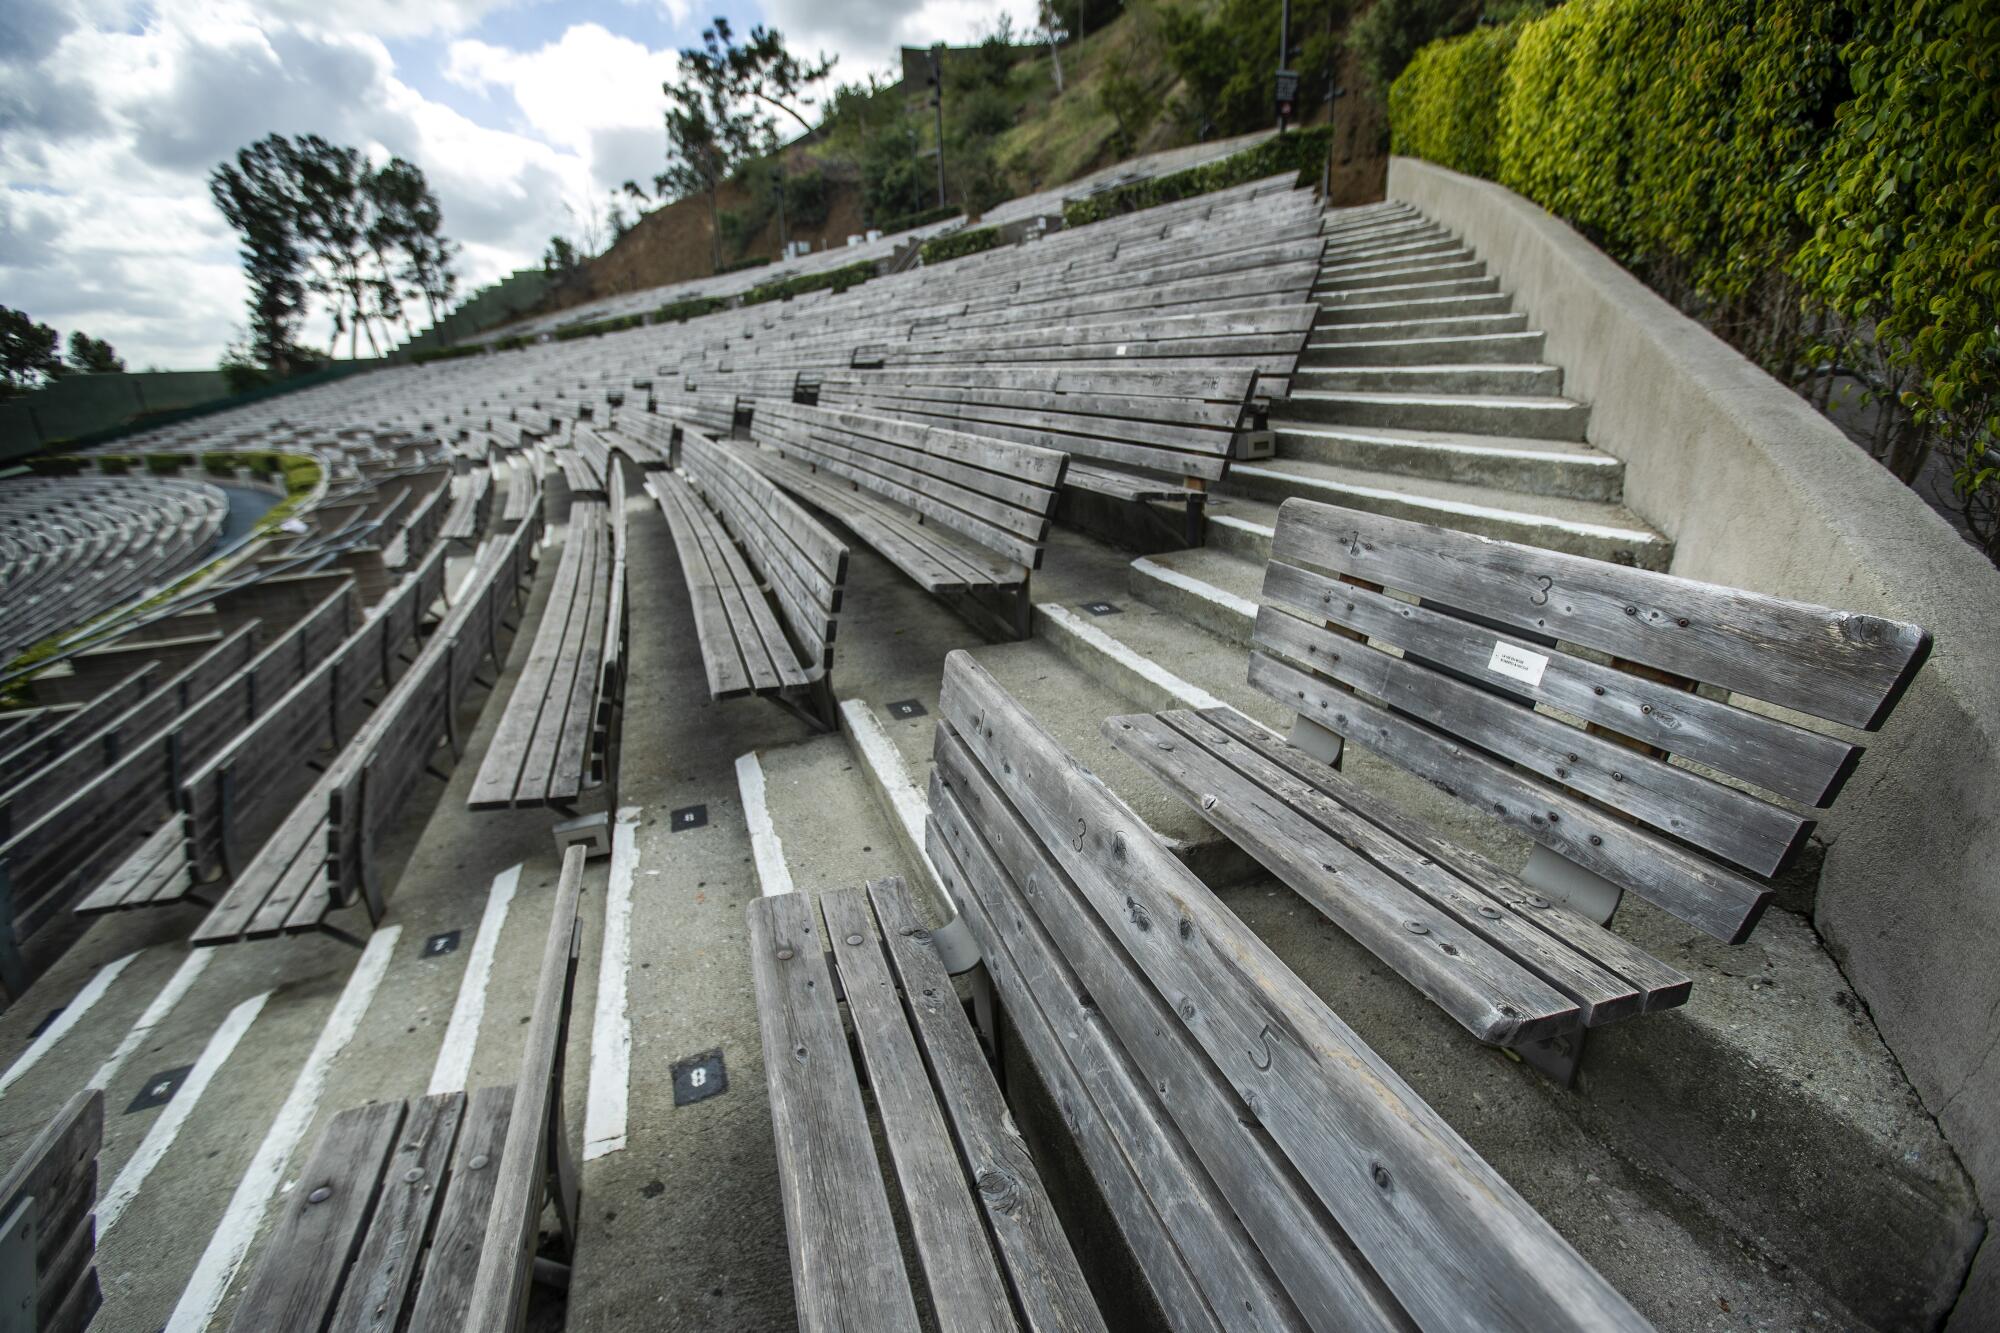 Wooden bench seats at the top (or back) of the Hollywood Bowl amphitheater